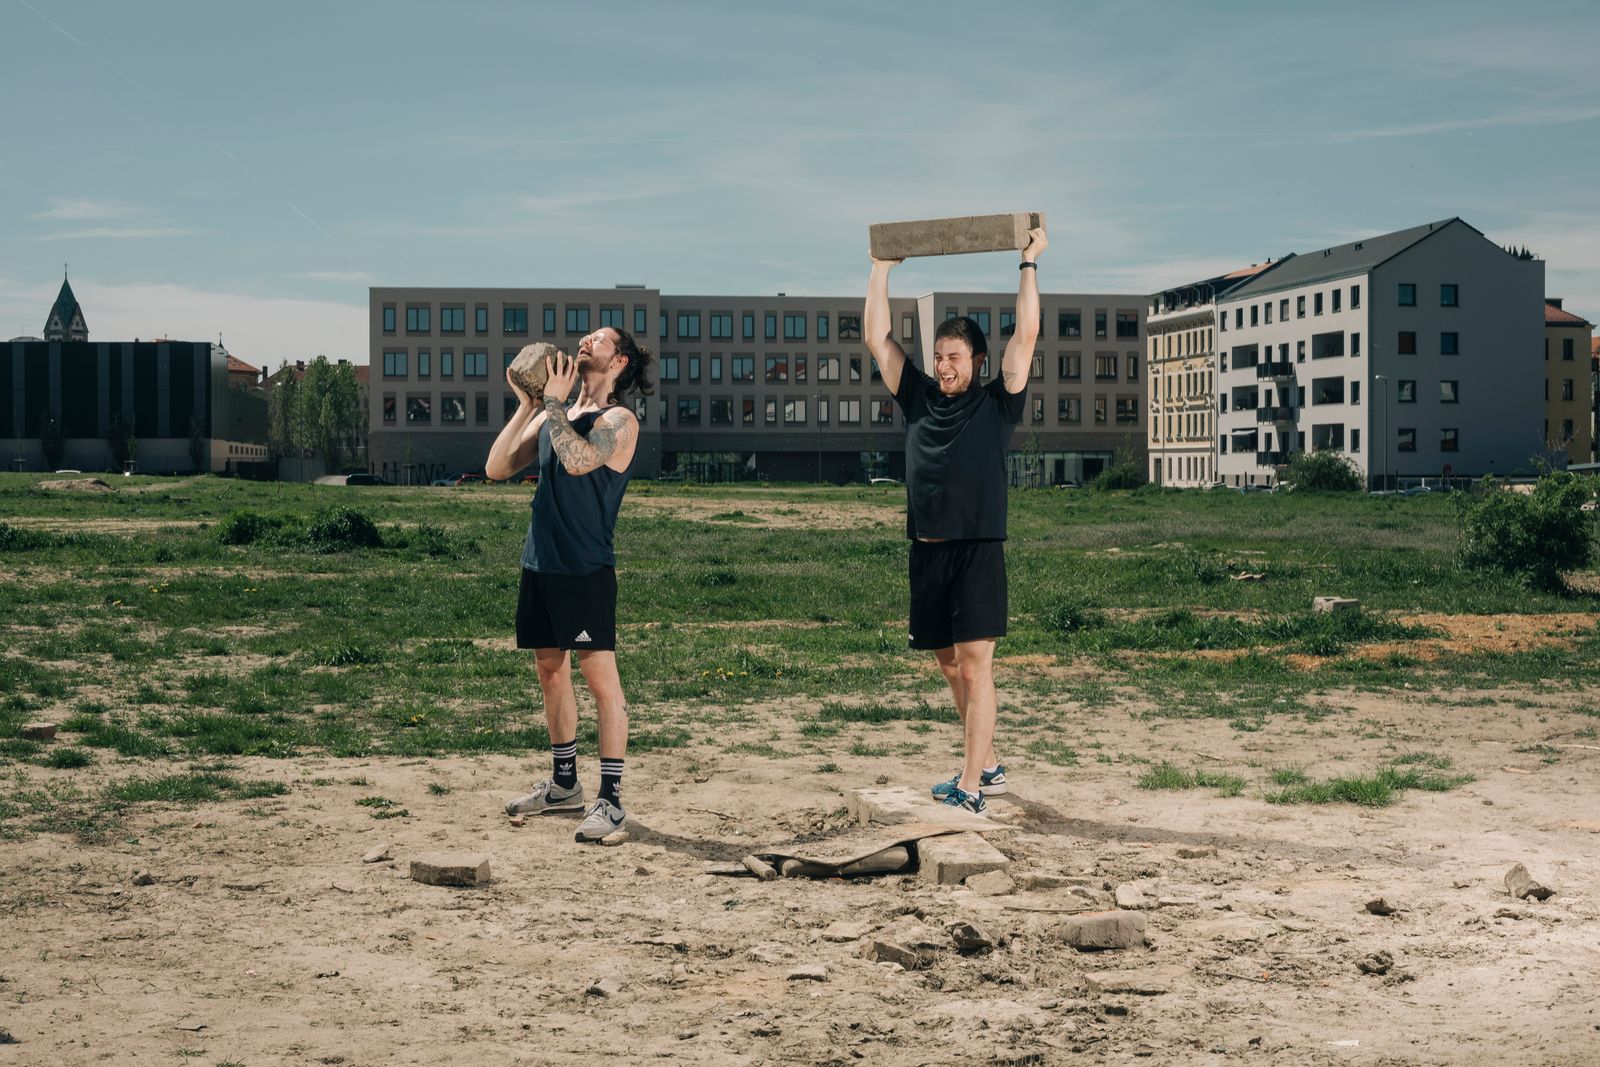 © Rafael Heygster - Since fitness studios are still closed, Max and his friend do their workout in the open air in Leipzig.